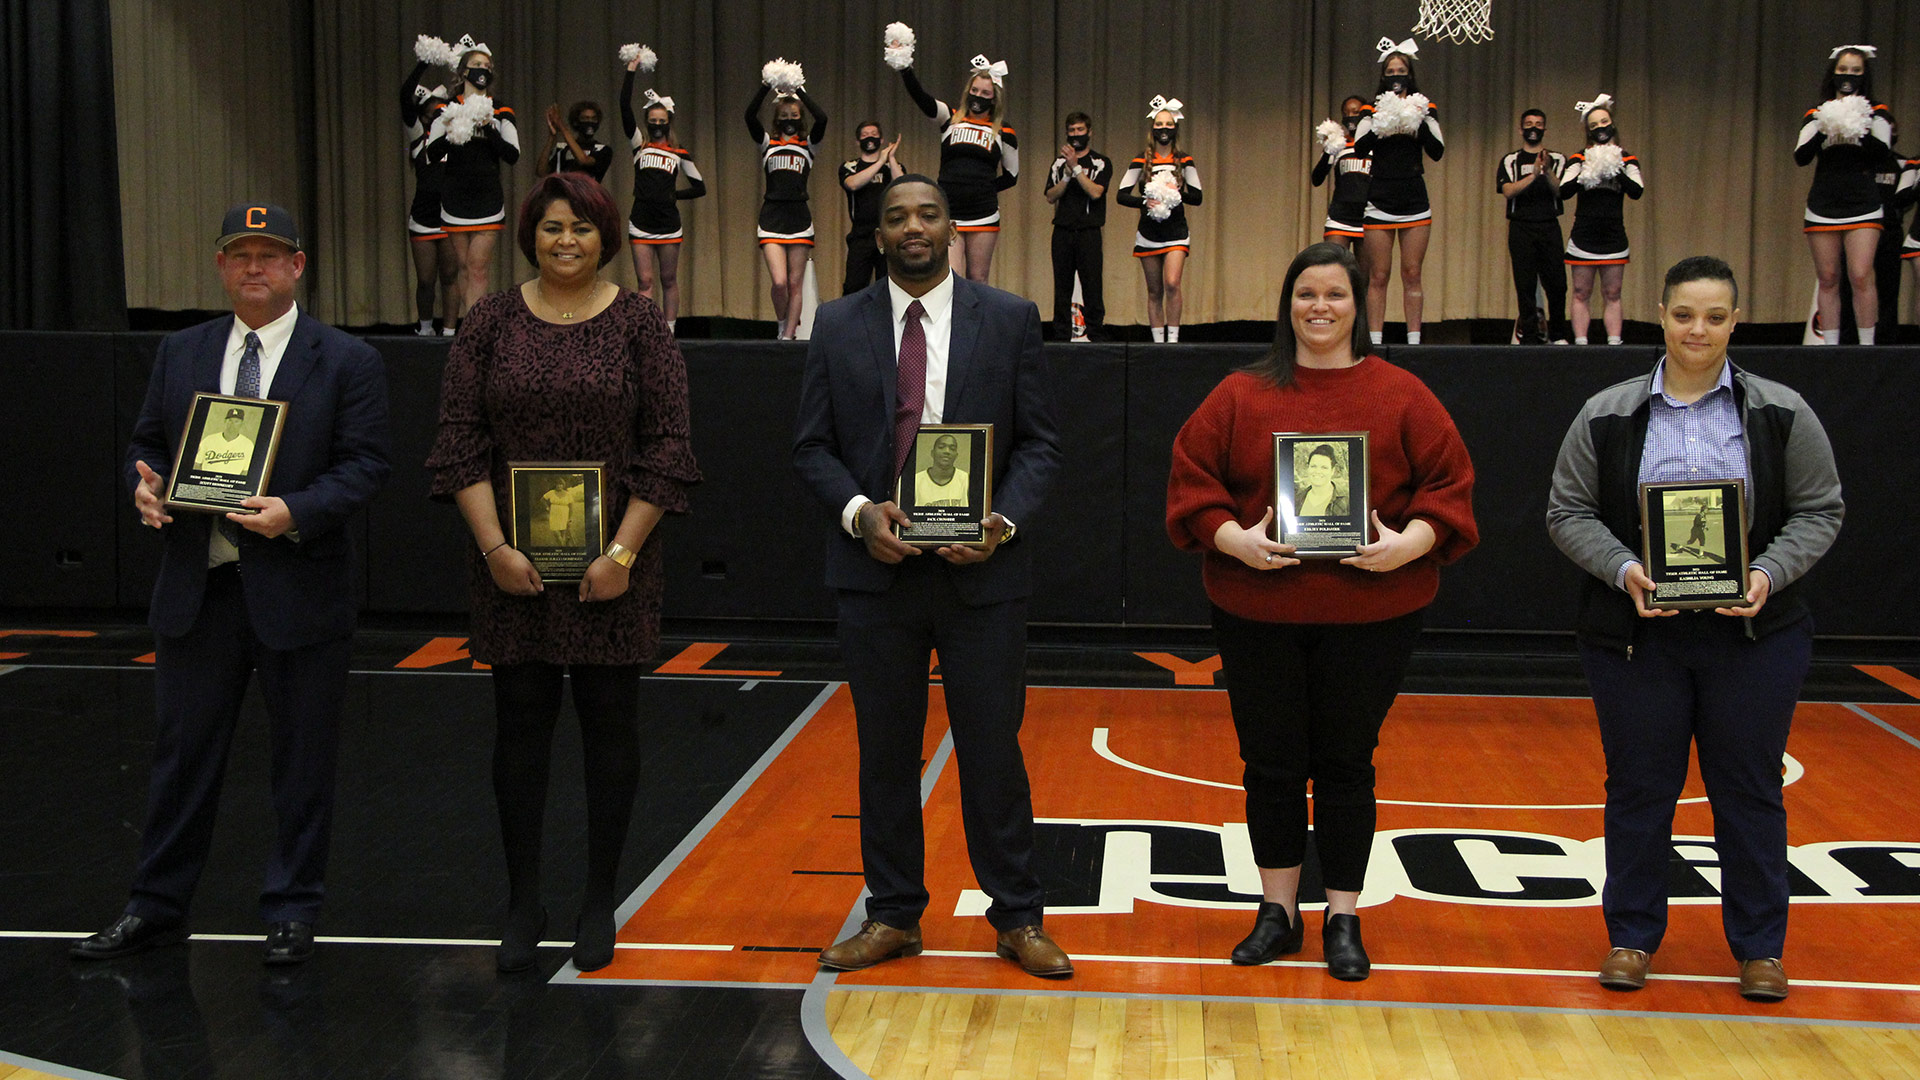 22nd Class inducted into Tiger Athletic Hall of Fame